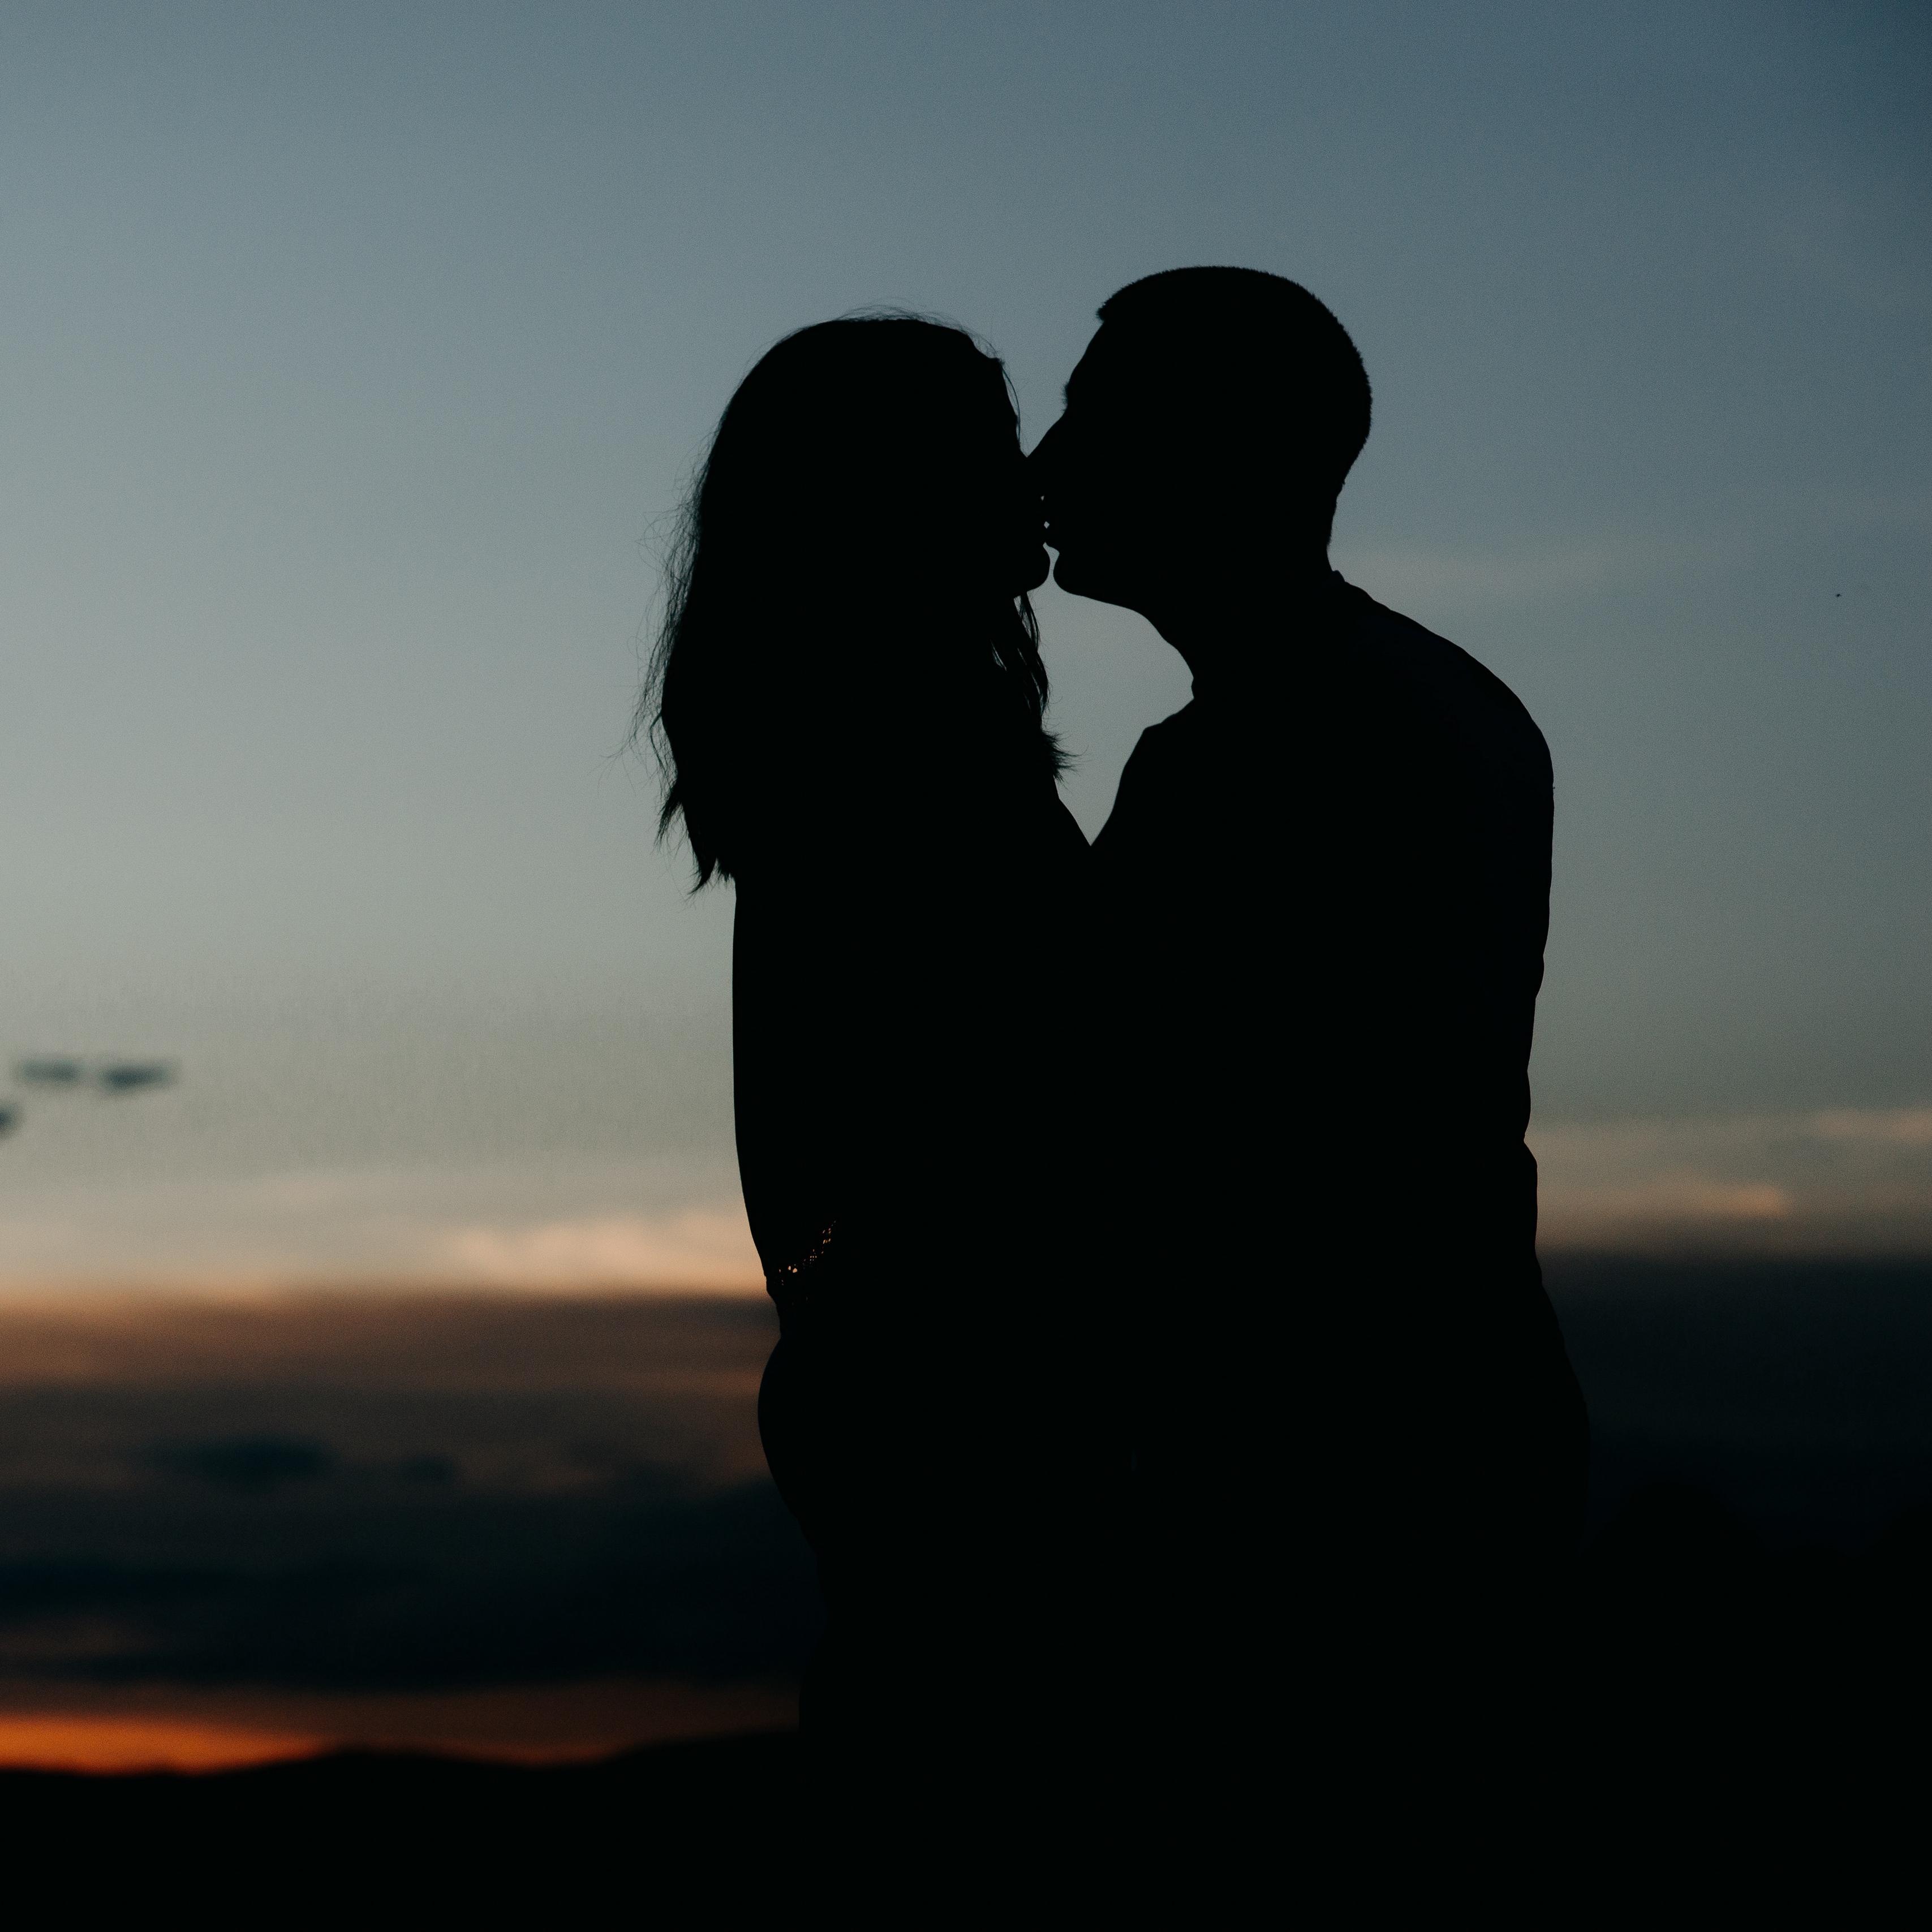 Download wallpaper 3415x3415 silhouettes, kiss, couple, love